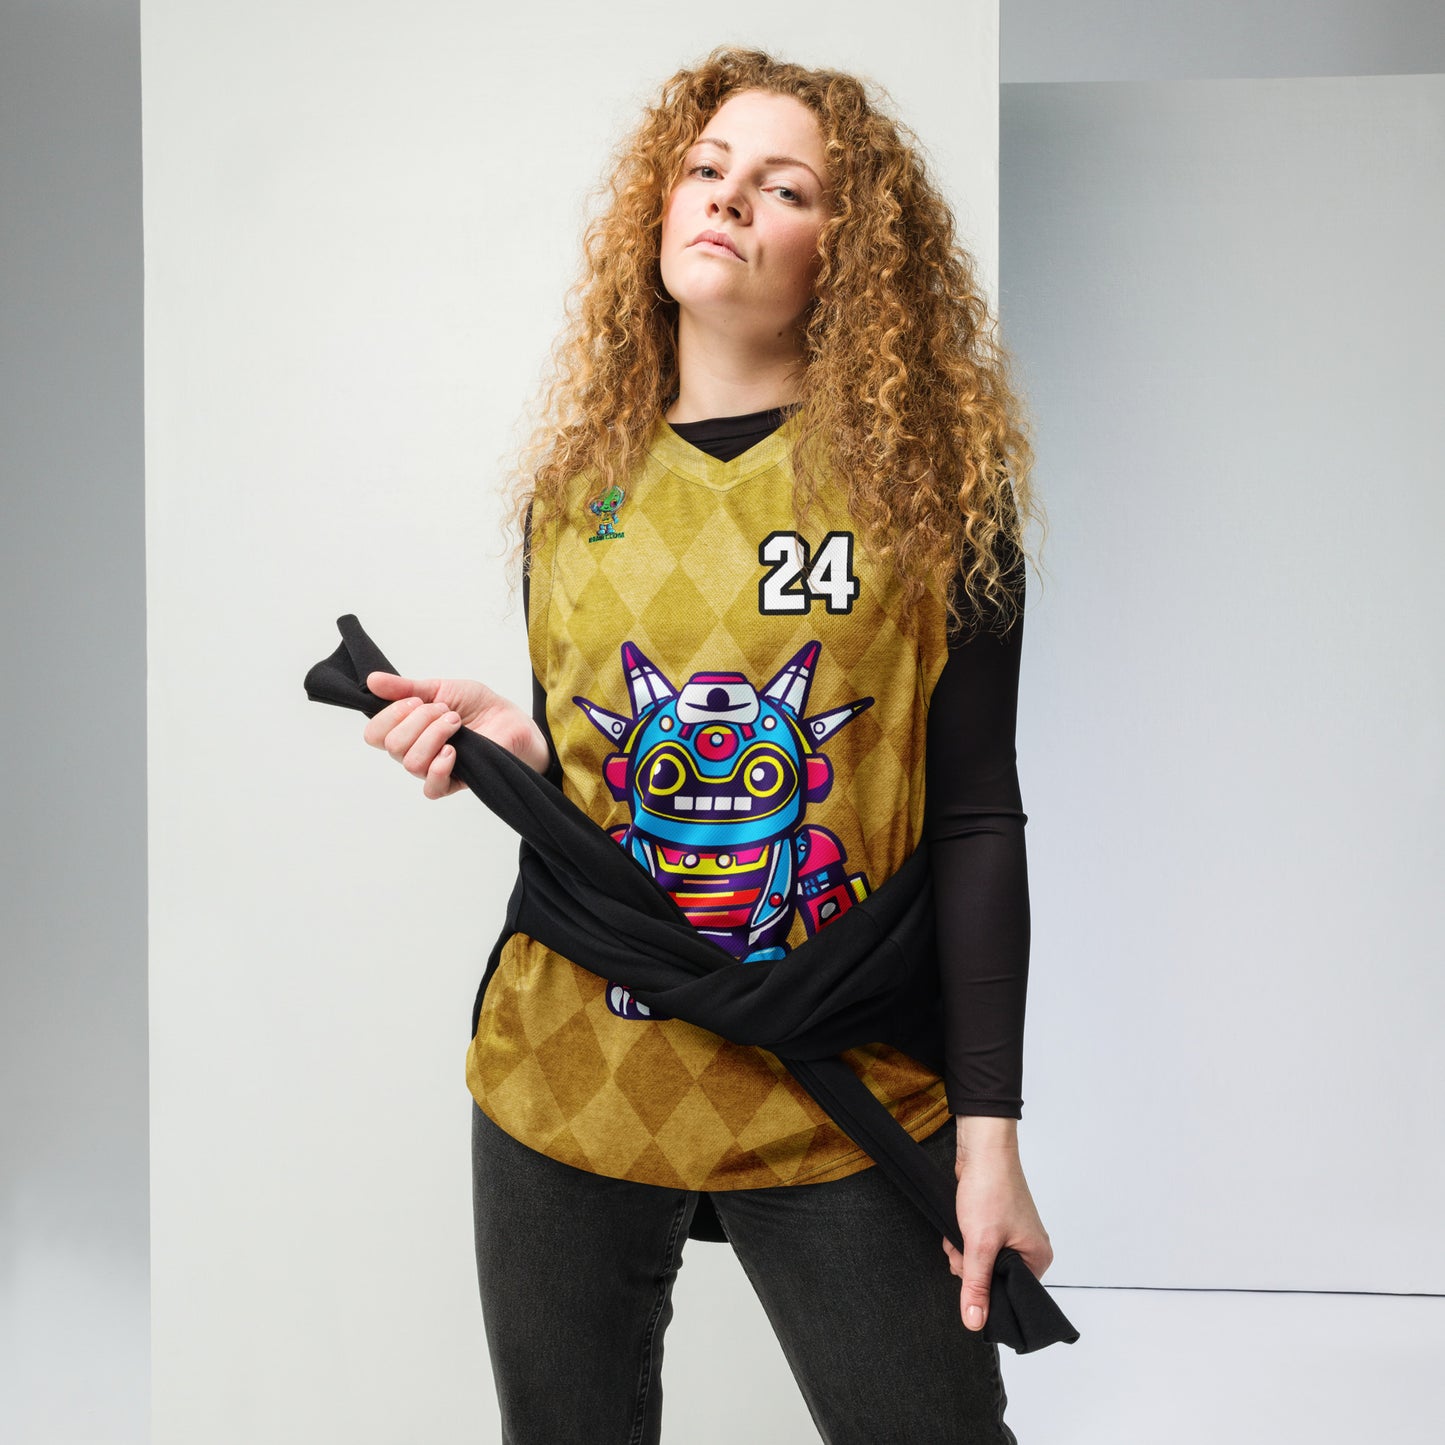 Techno Guardian - Recycled unisex basketball jersey - Golden Argyle Colorway